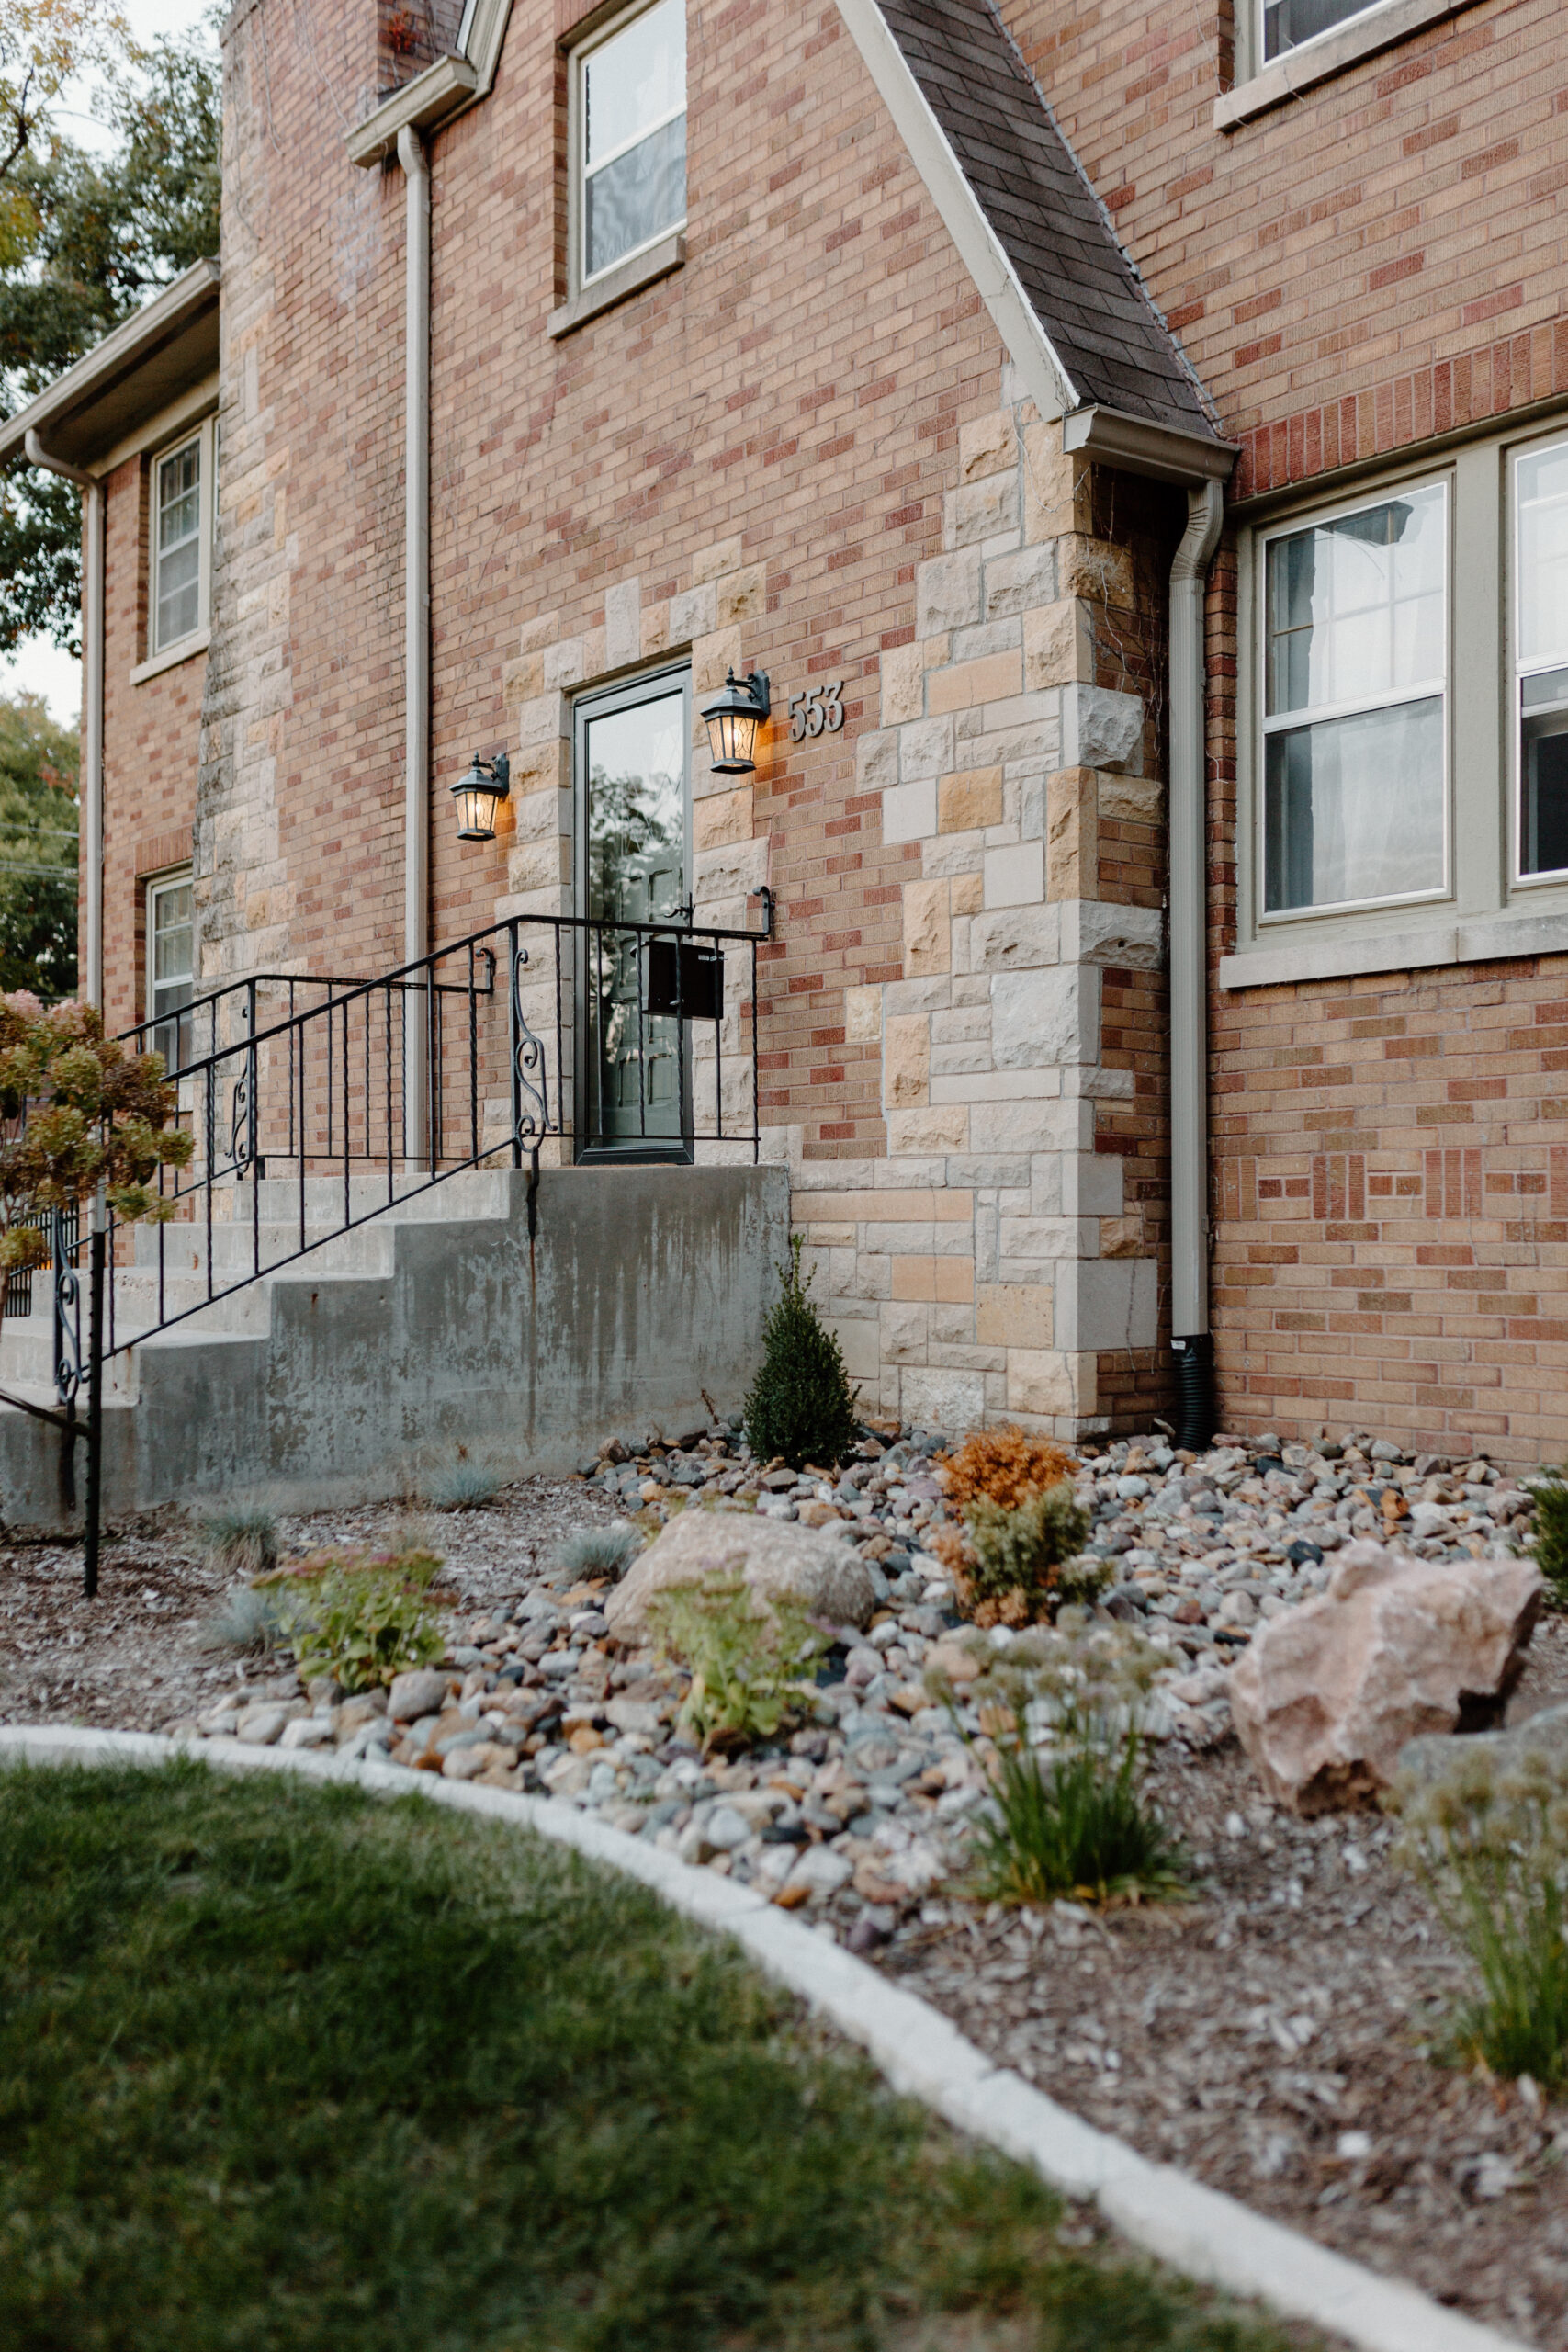 Rock garden bed in front of a brick and stone house. Central Iowa Landscape Installation